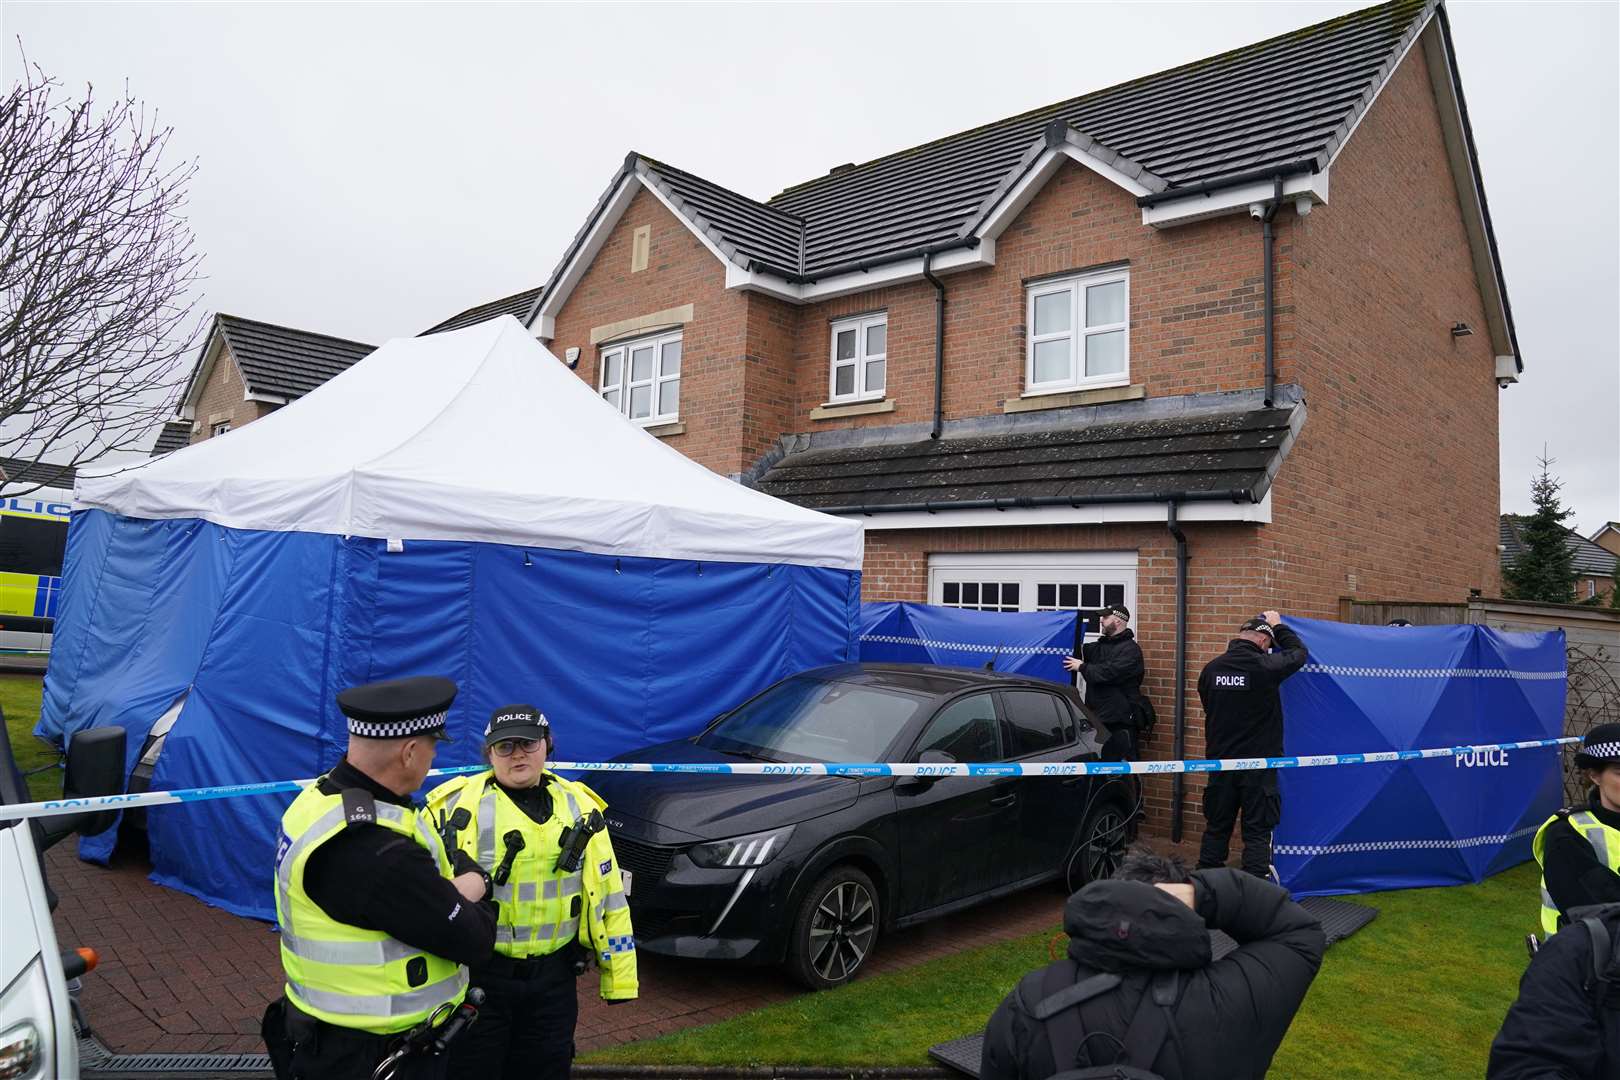 The image of a police tent on the lawn of the former first minister’s home was widely shared (Andrew Milligan/PA)